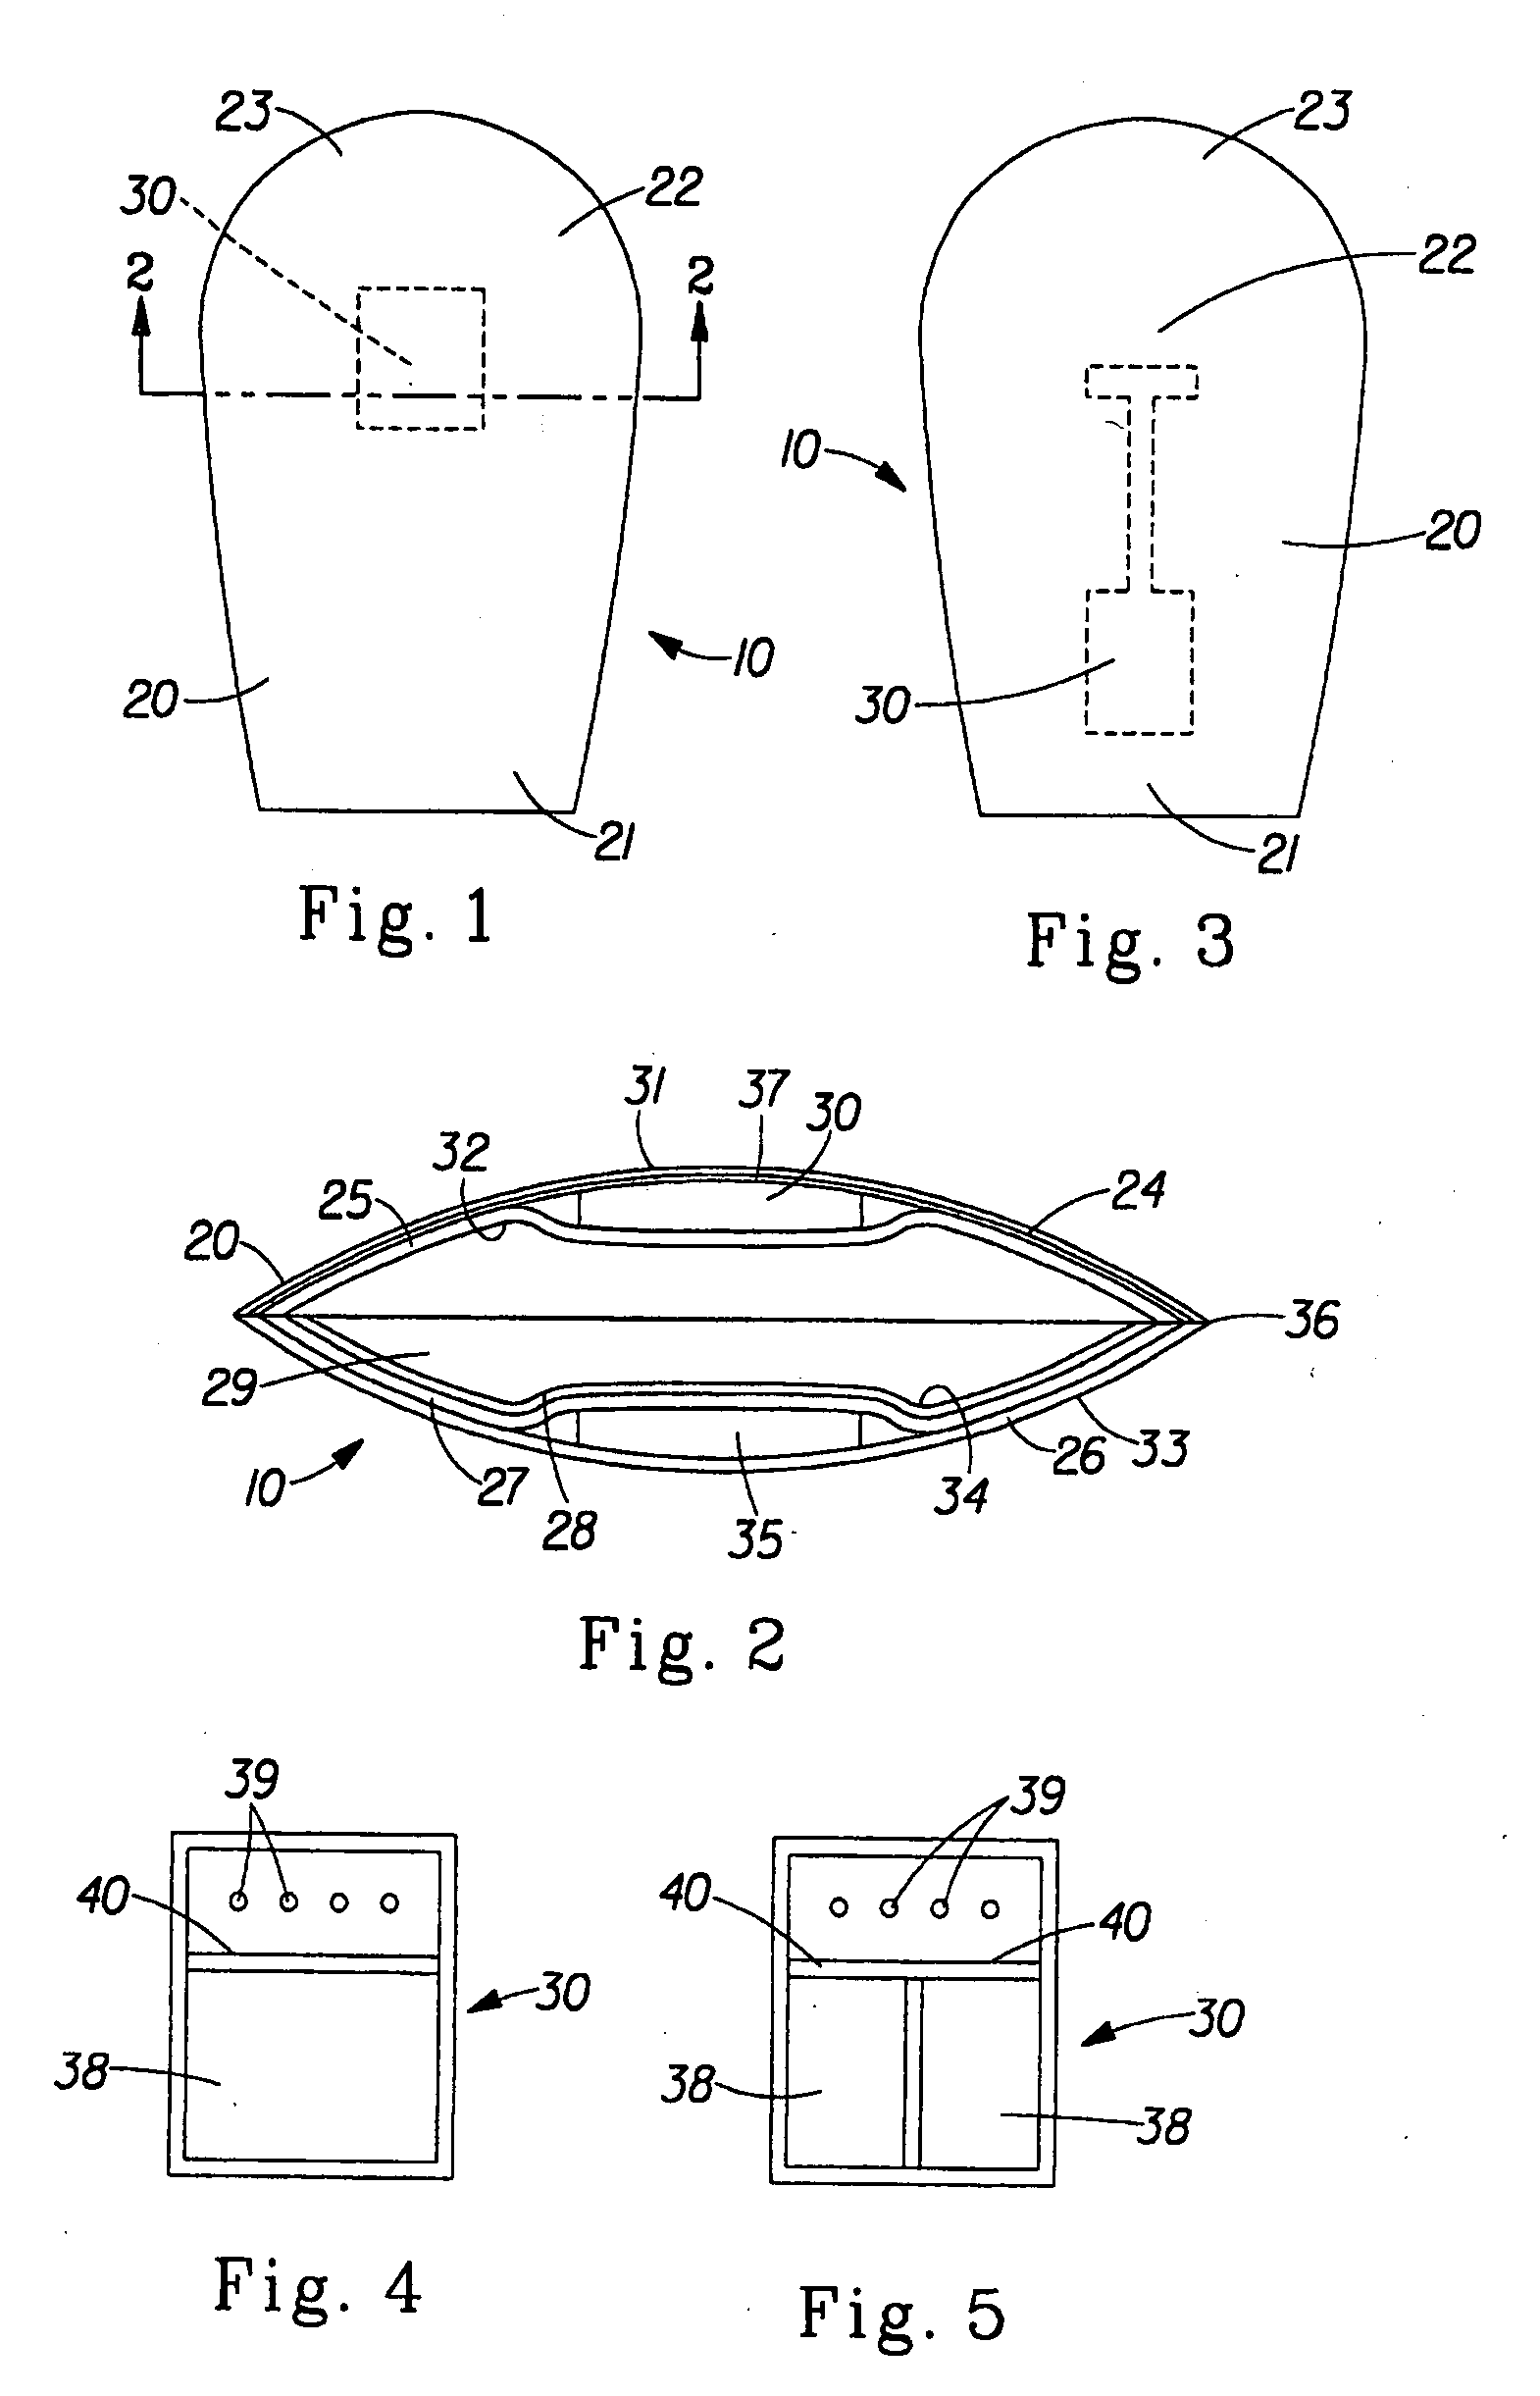 Semi-enclosed applicator for distributing a substance onto a target surface